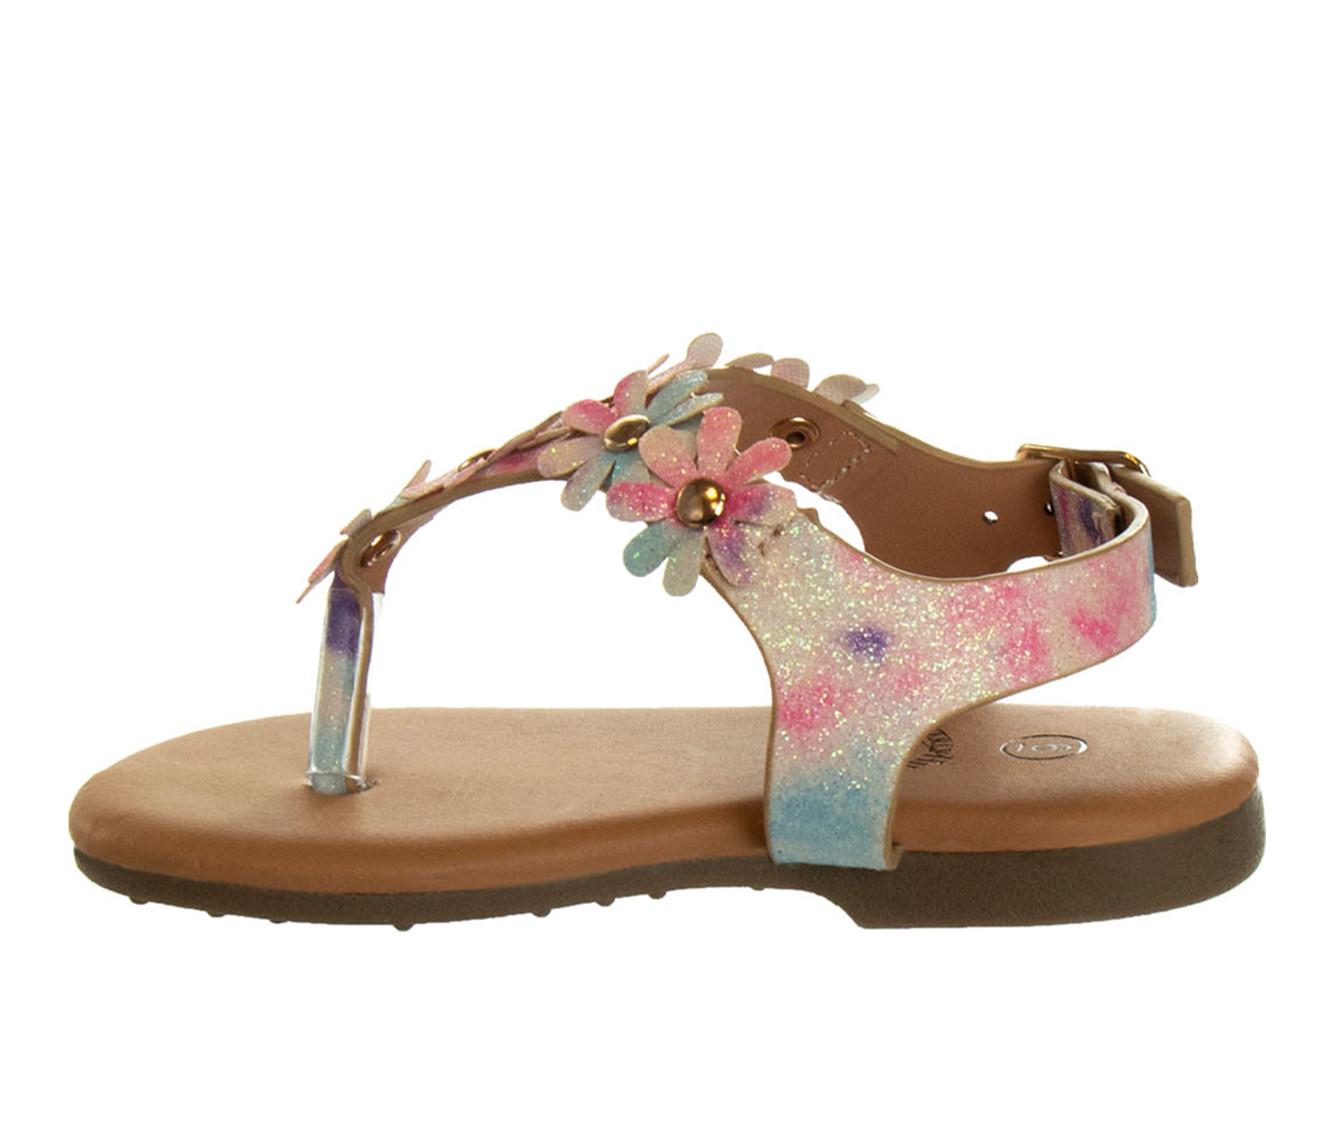 Girls' Beverly Hills Polo Club Toddler Youthful Crsr Sandals